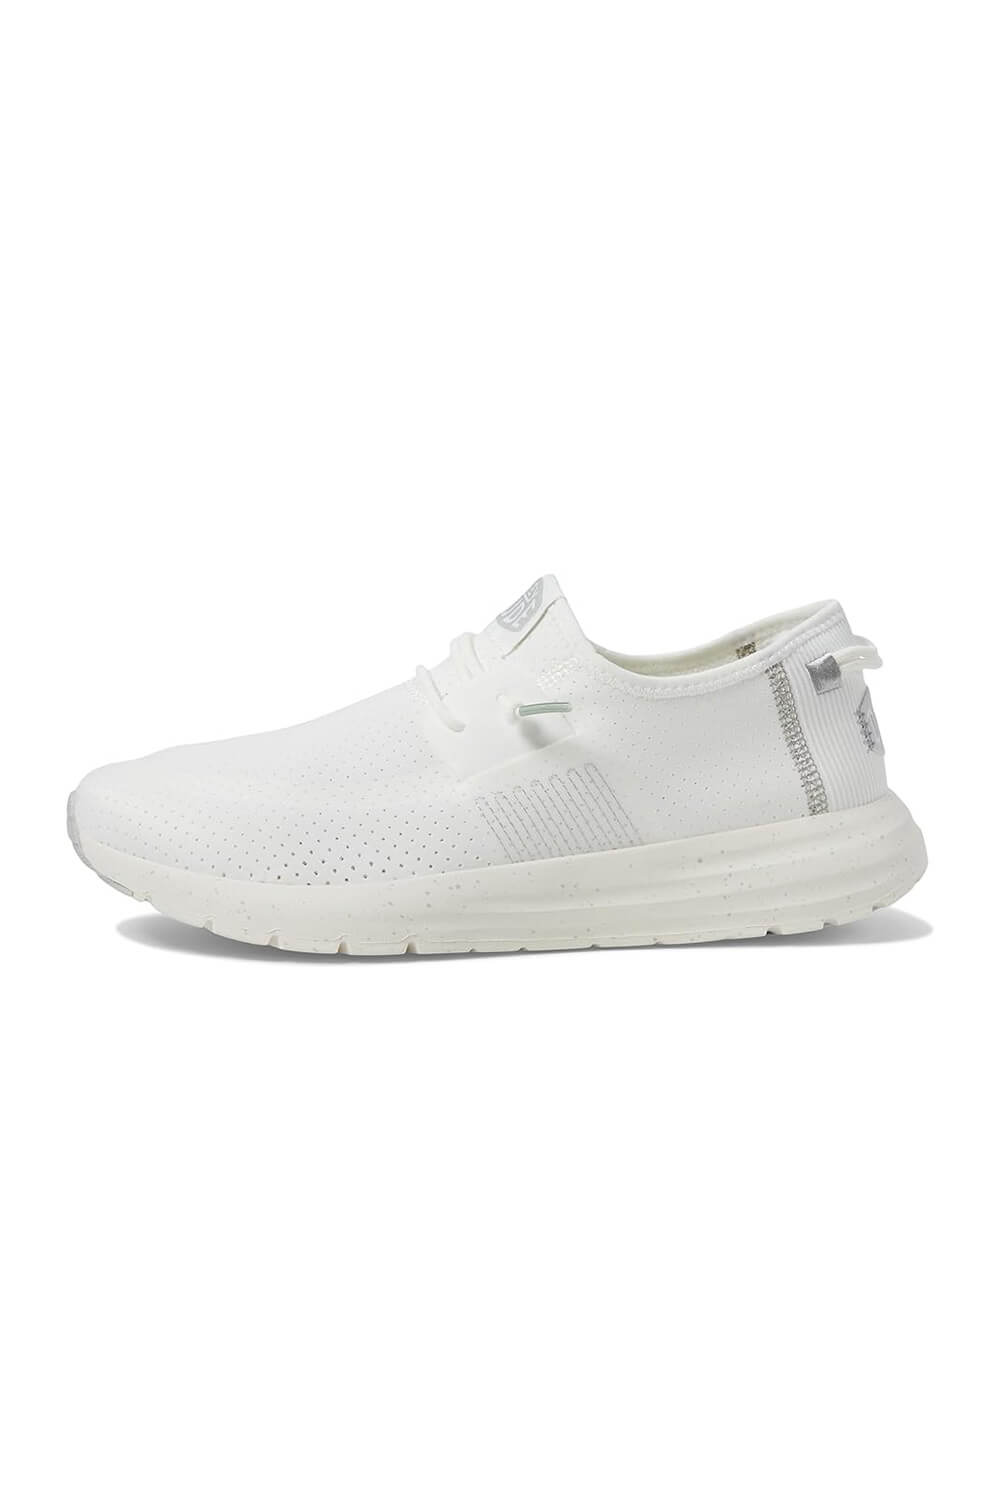 HEYDUDE Men's Sirocco Perf Mesh Shoes in White | 40967-143 – Glik's